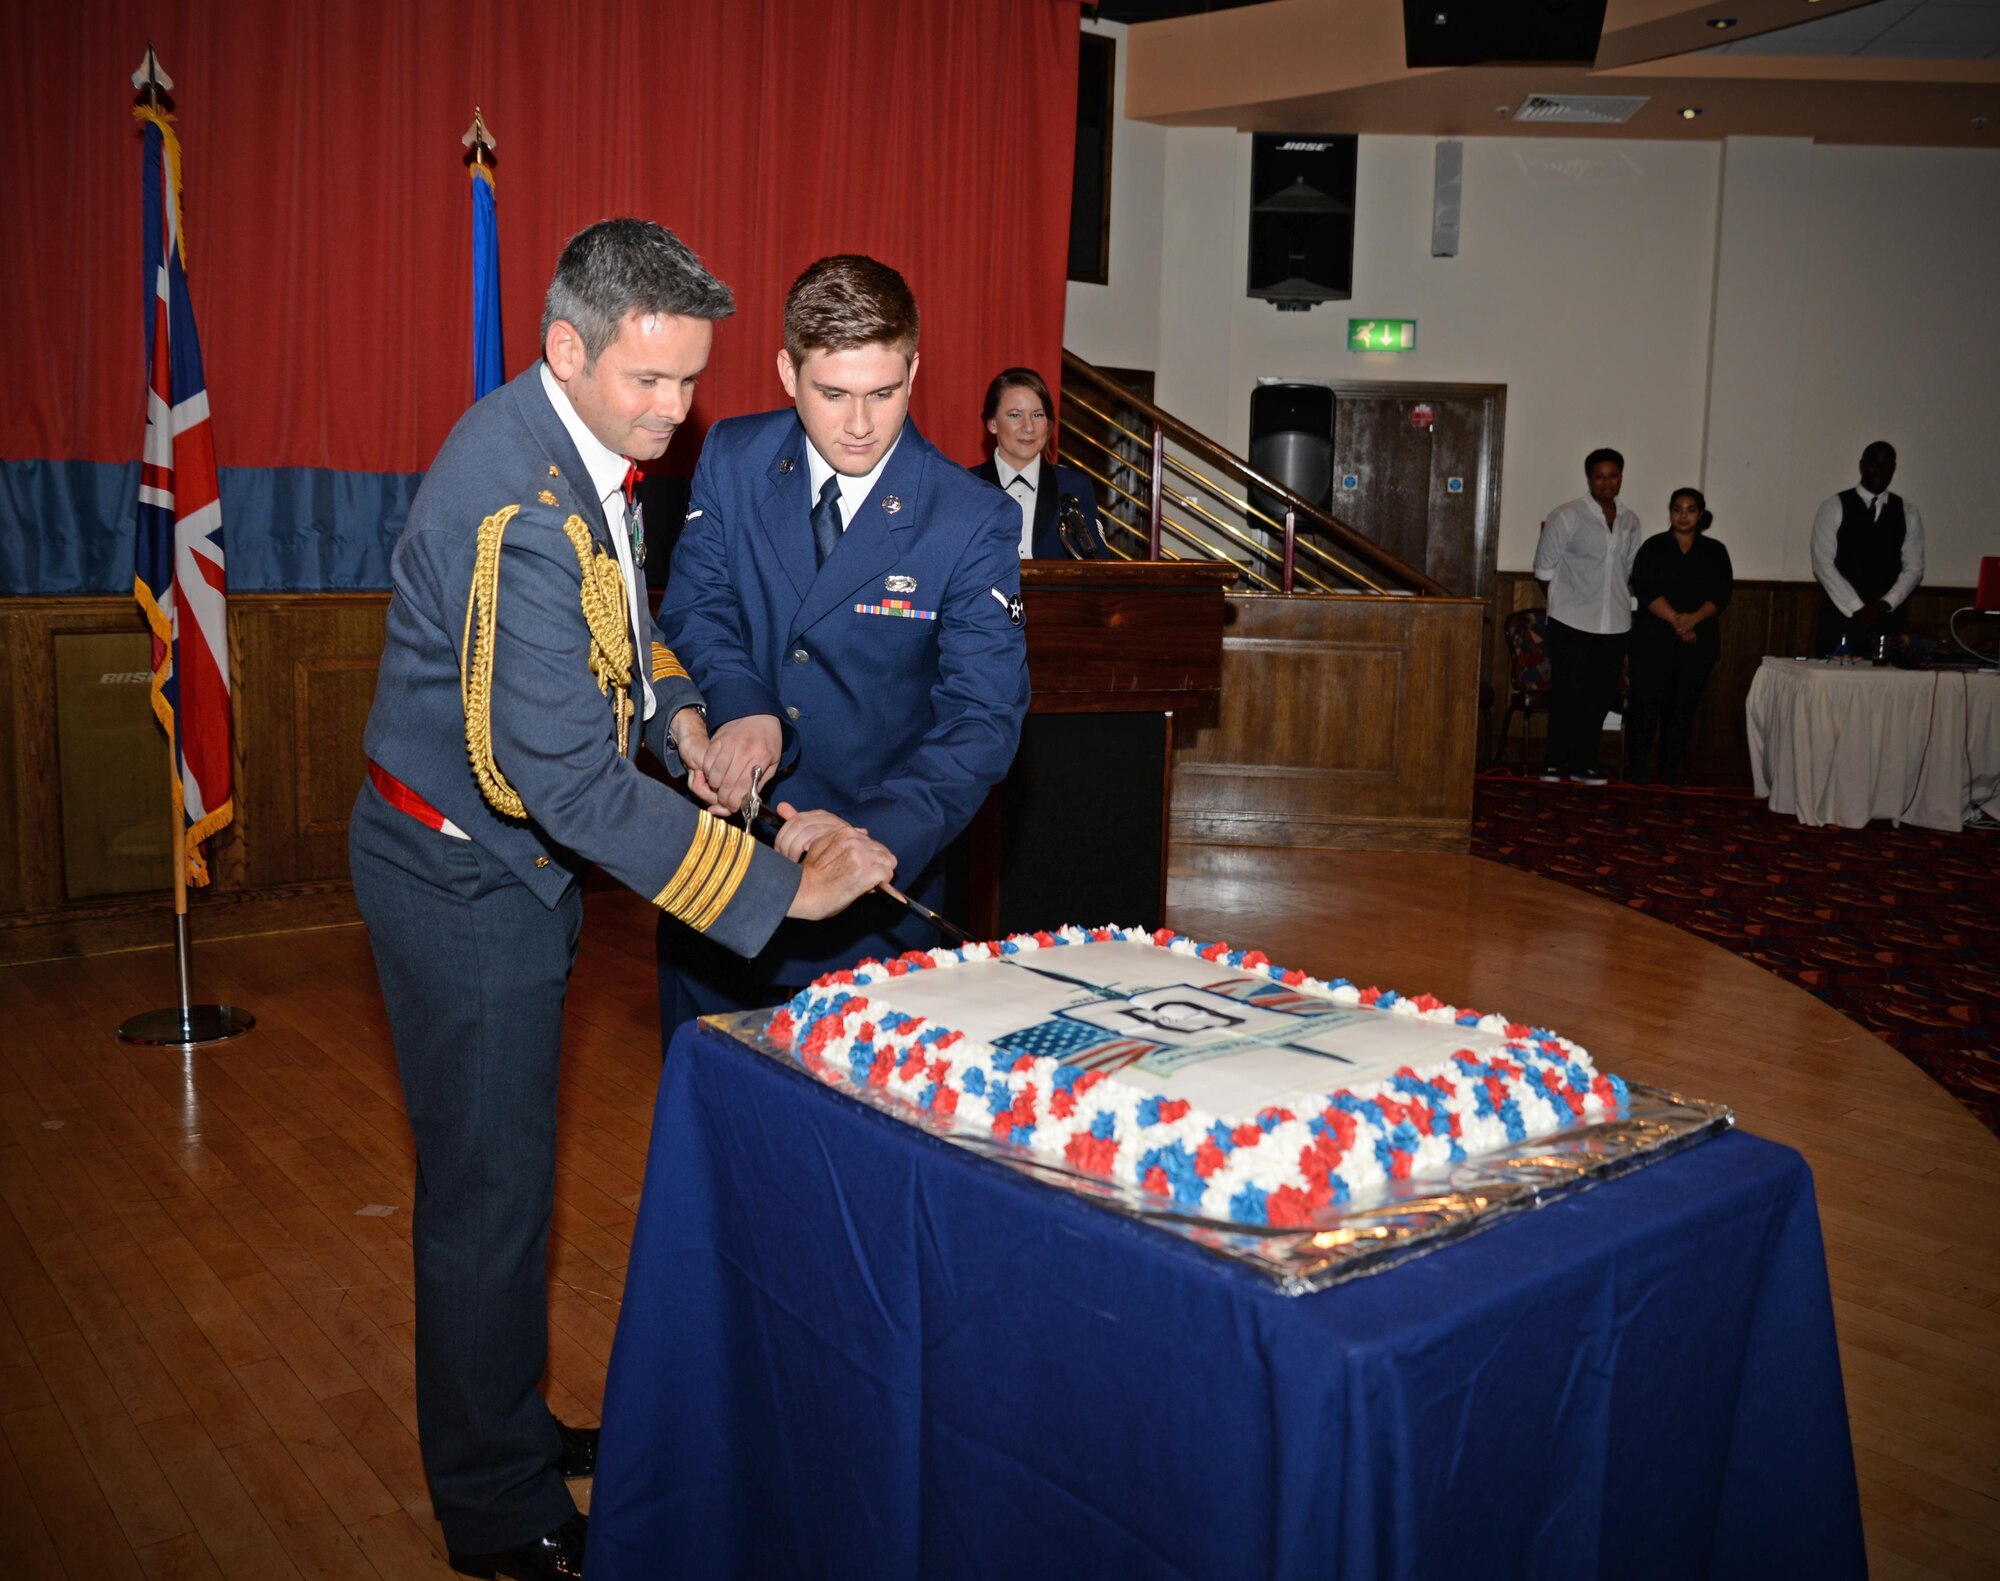 Royal Air Force Group Captain Richard Davies, left, RAF Marham Station Commander, and U.S. Air Force Airman Dylan Aubrey, 100th Force Support Squadron customer service apprentice, cut a cake during the Air Force Ball as part of opening of the ceremony Sept. 17, 2016, on RAF Mildenhall, England. Individuals chosen to cut the cake are traditionally those with the least and the greatest amount of time in service. (U.S. Air Force photo by Senior Airman Christine Halan)